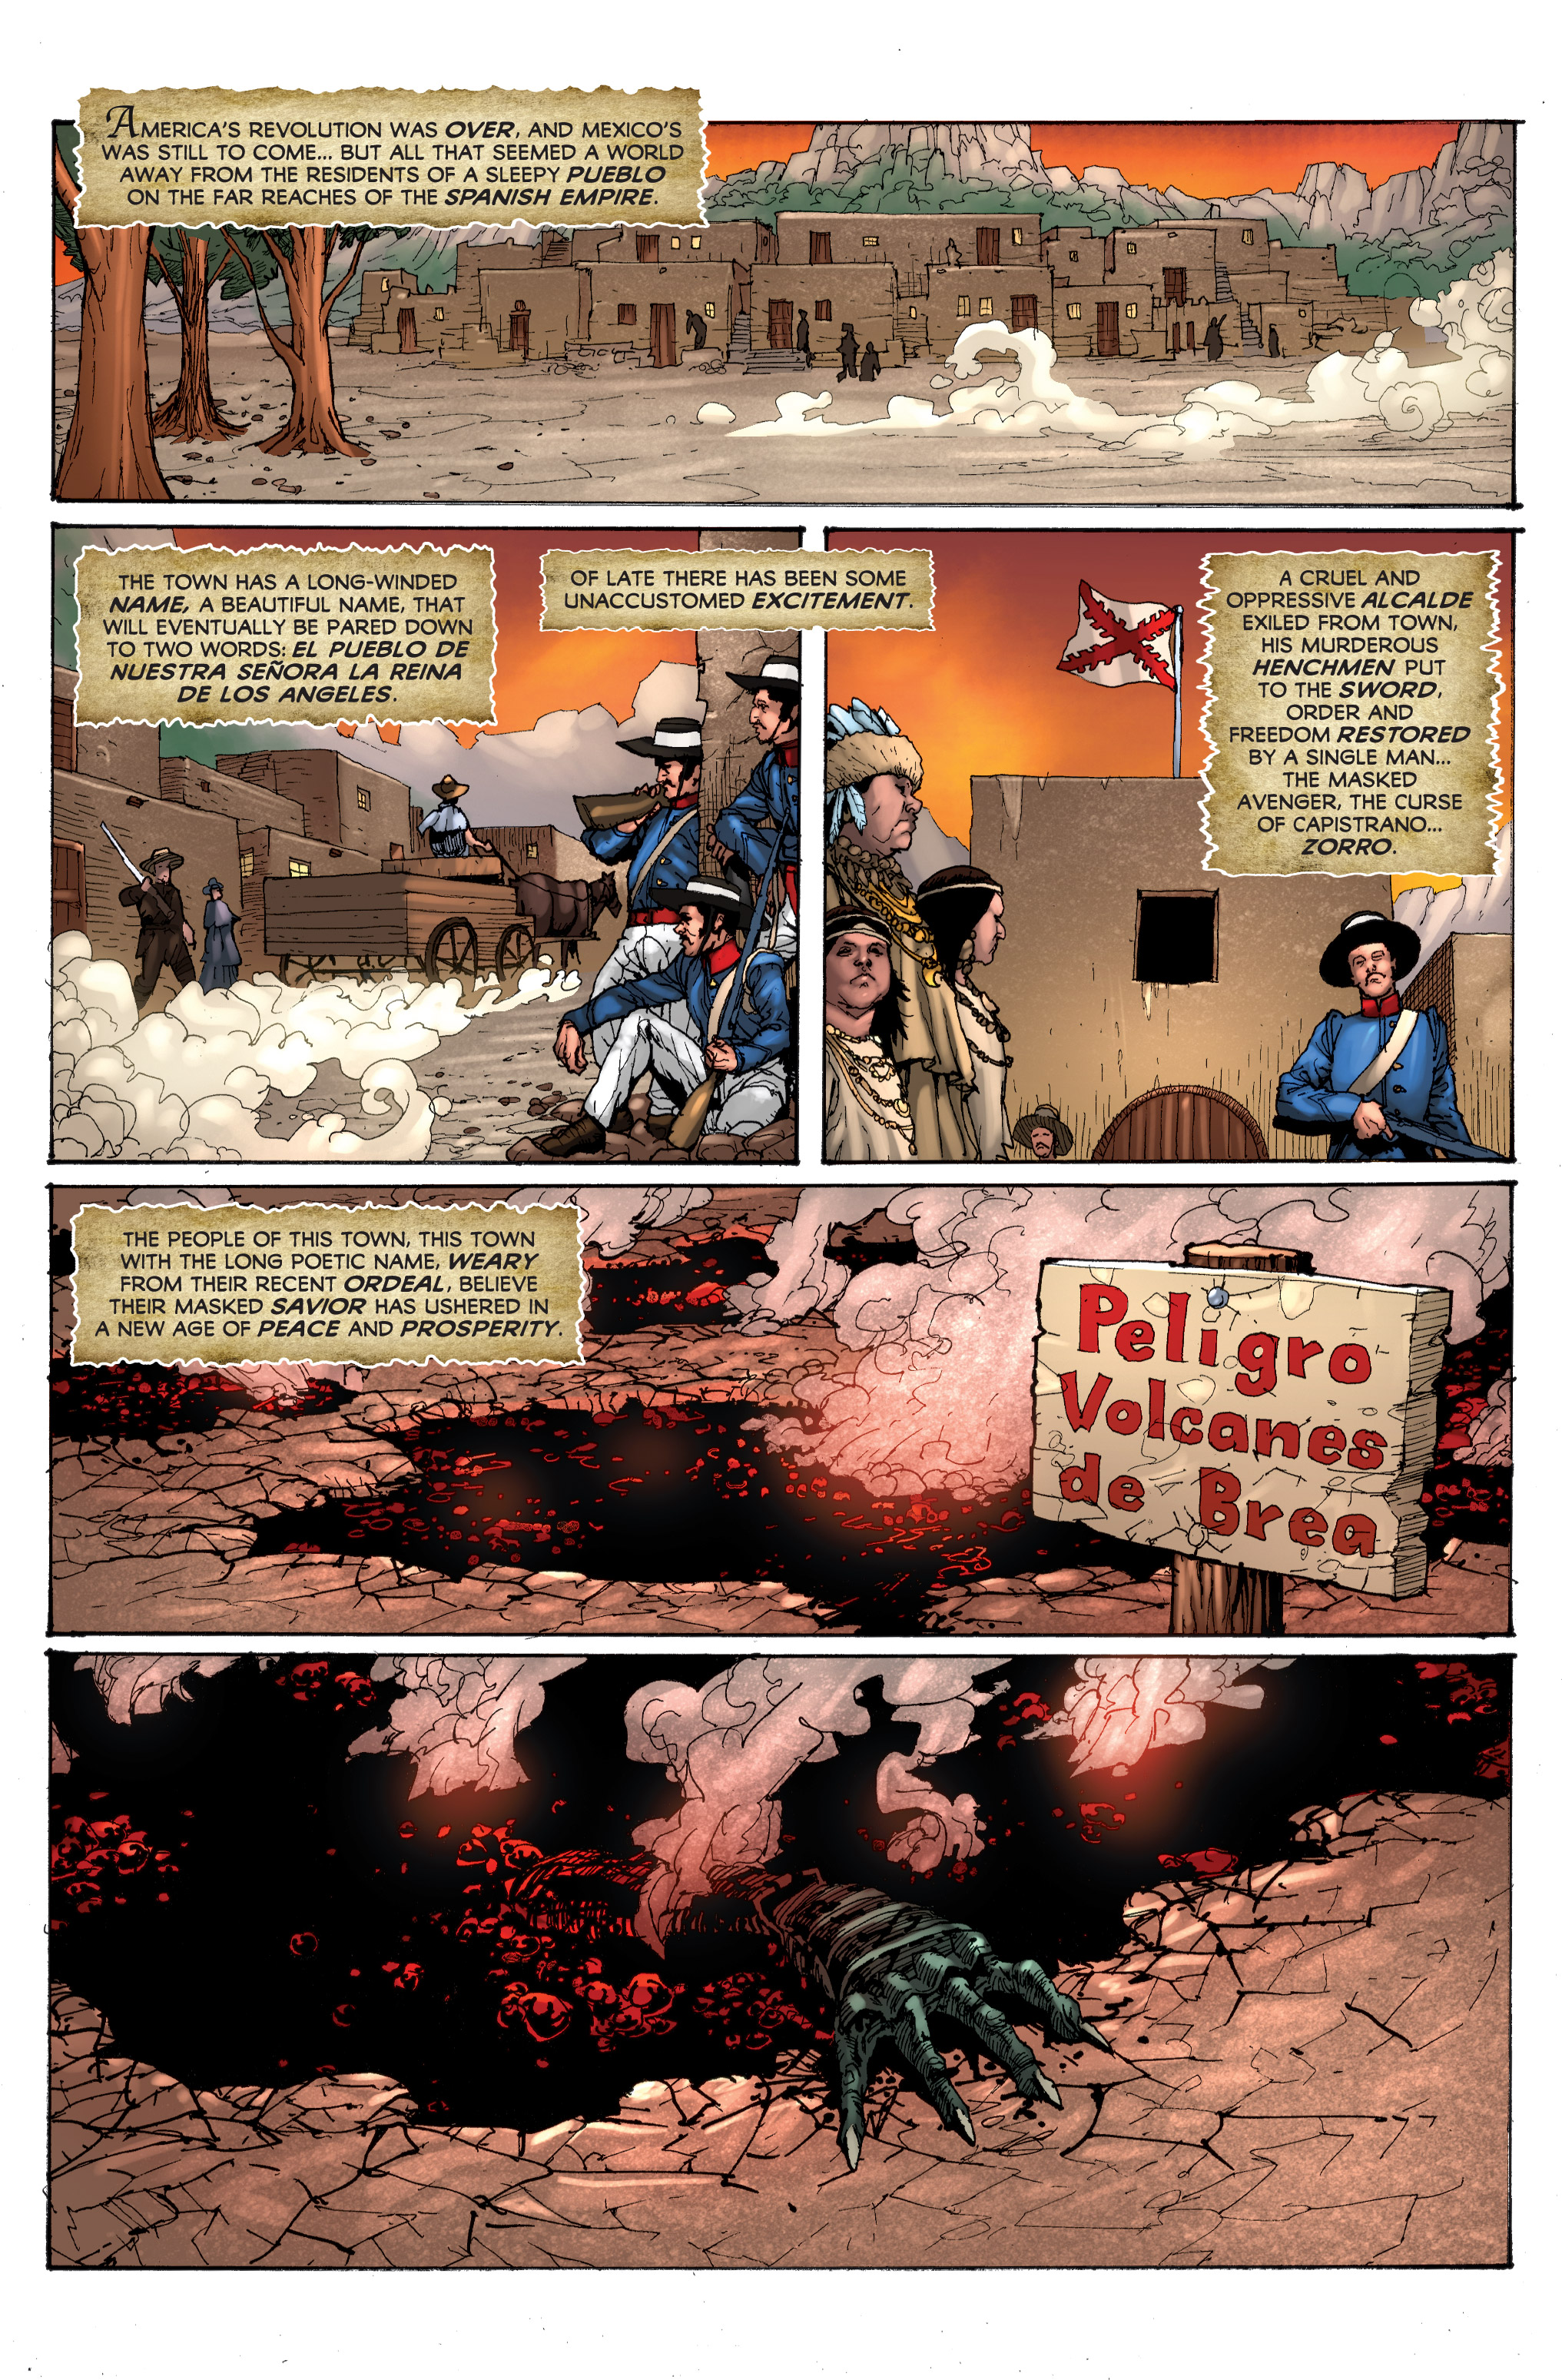 Zorro: Swords of Hell (2018-): Chapter 1 - Page 4